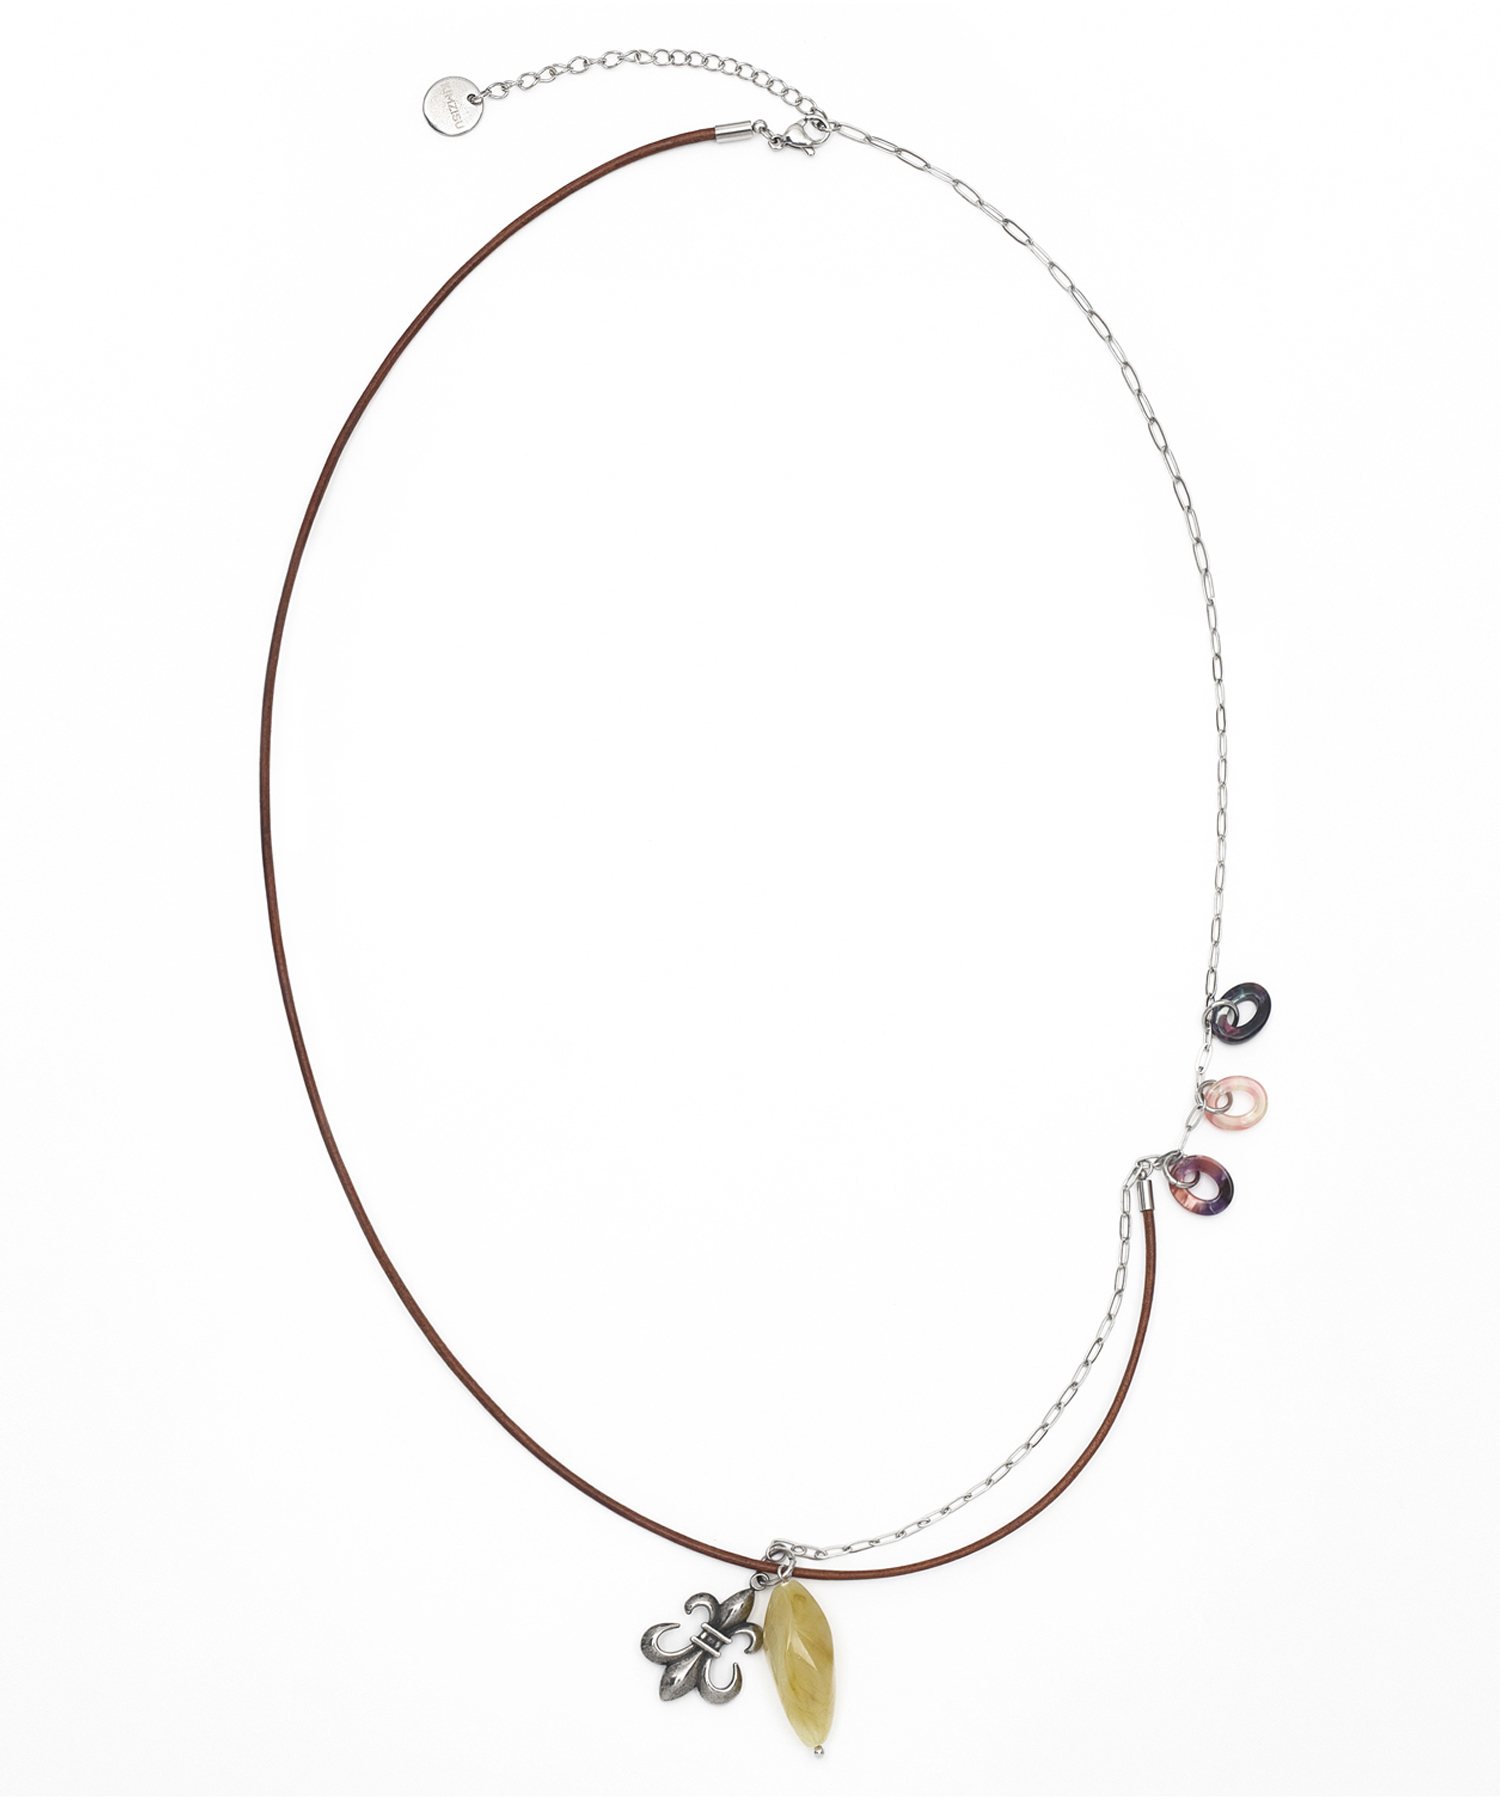 Stone Combi Necklace - Anchor _ BROWN